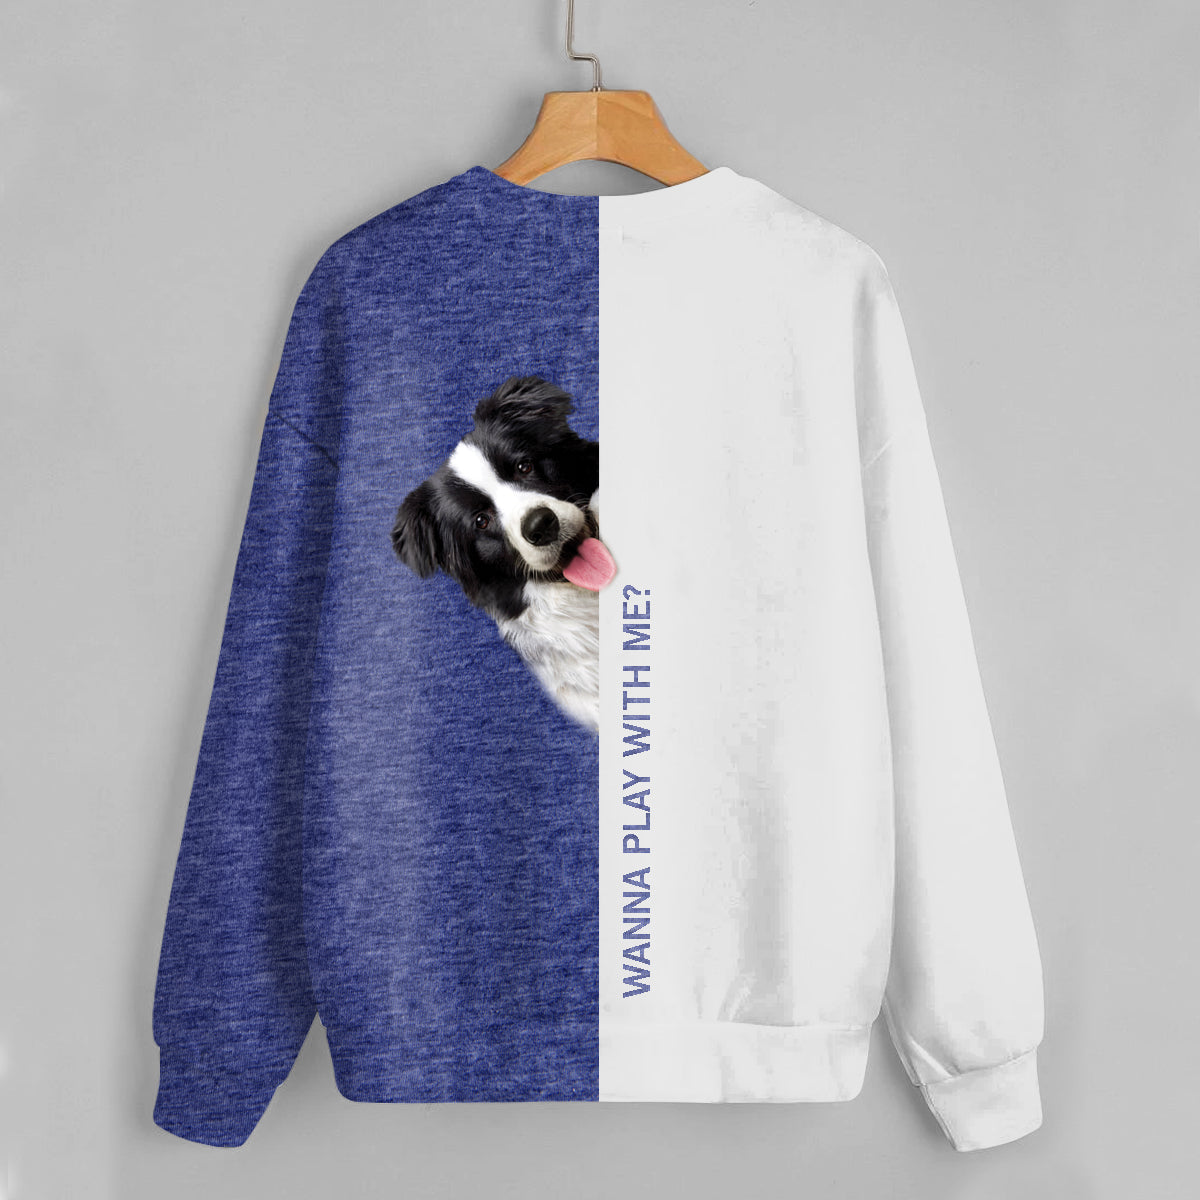 Funny Happy Time - Sweat-shirt Border Collie V1